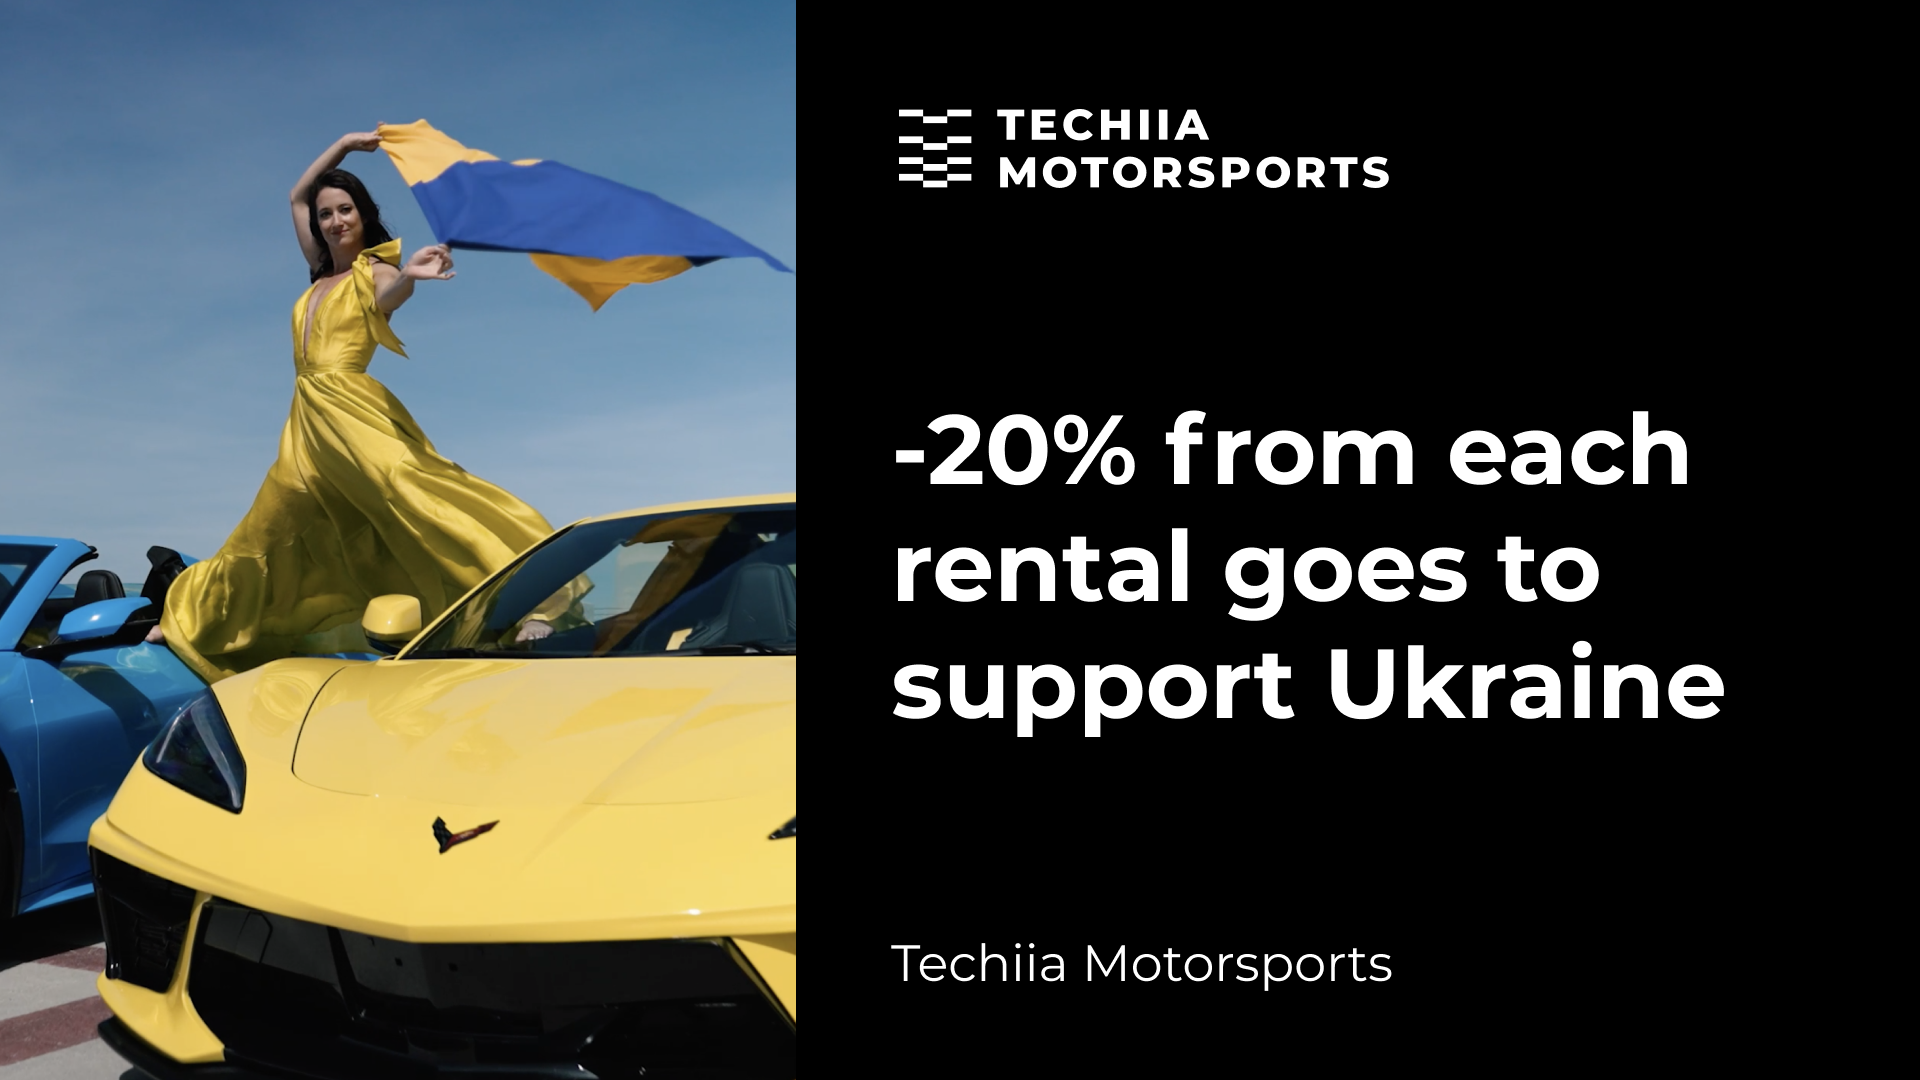 TECHIIA Motorsports launches an initiative to support the defenders of Ukraine